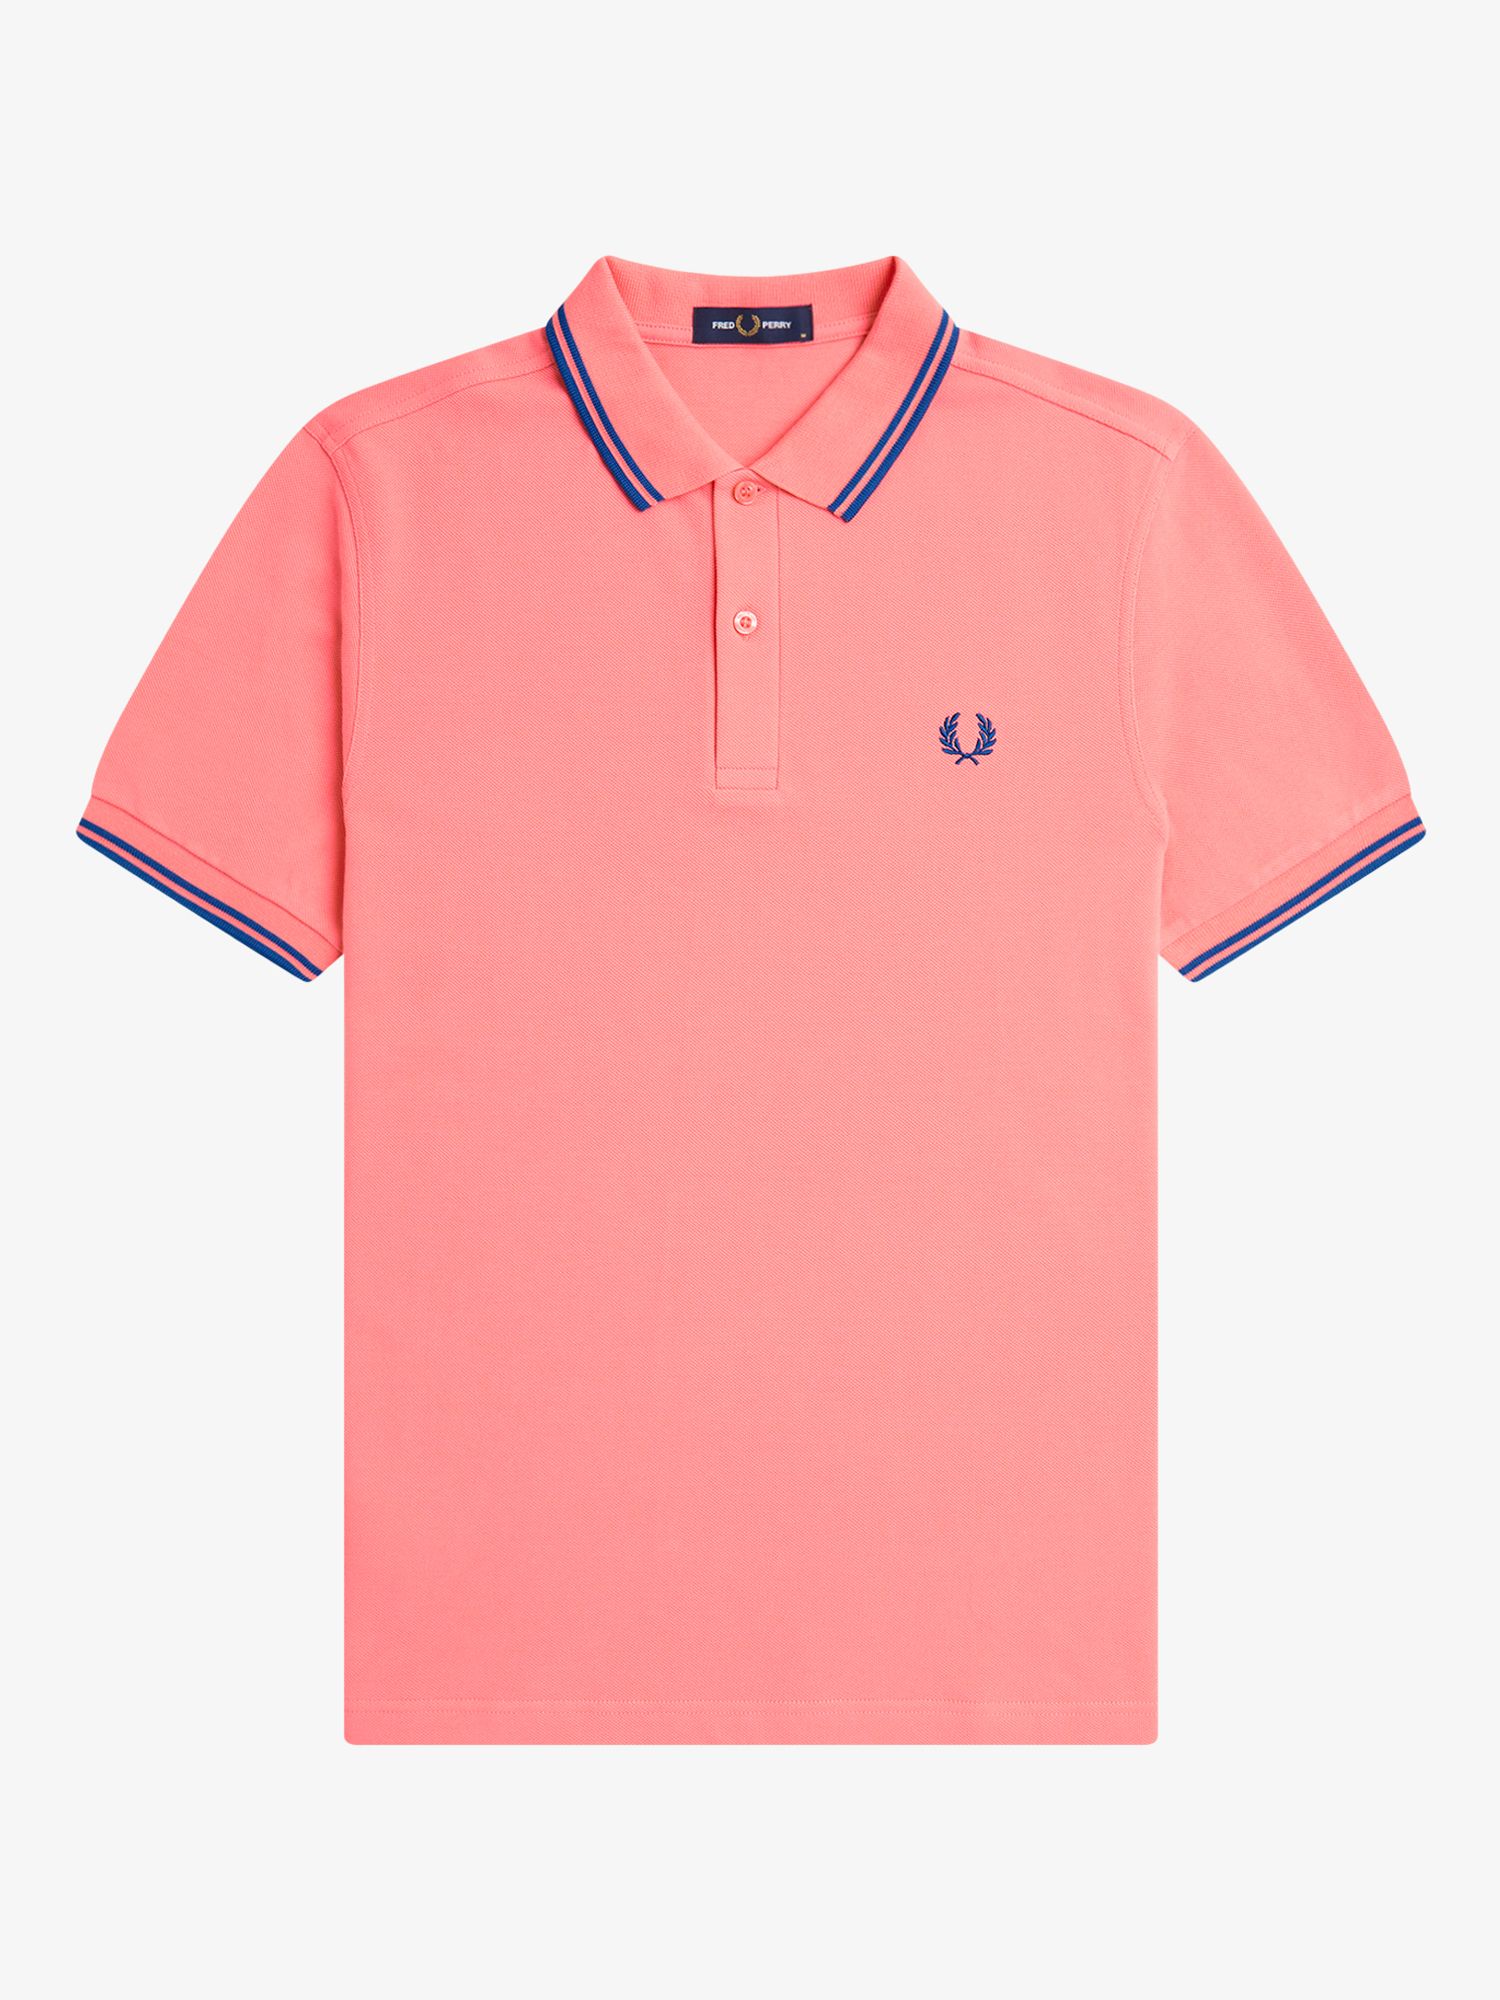 Fred Perry The Twin Tipped Short Sleeve T-Shirt, V28 Crlheat/Shdcobal, S